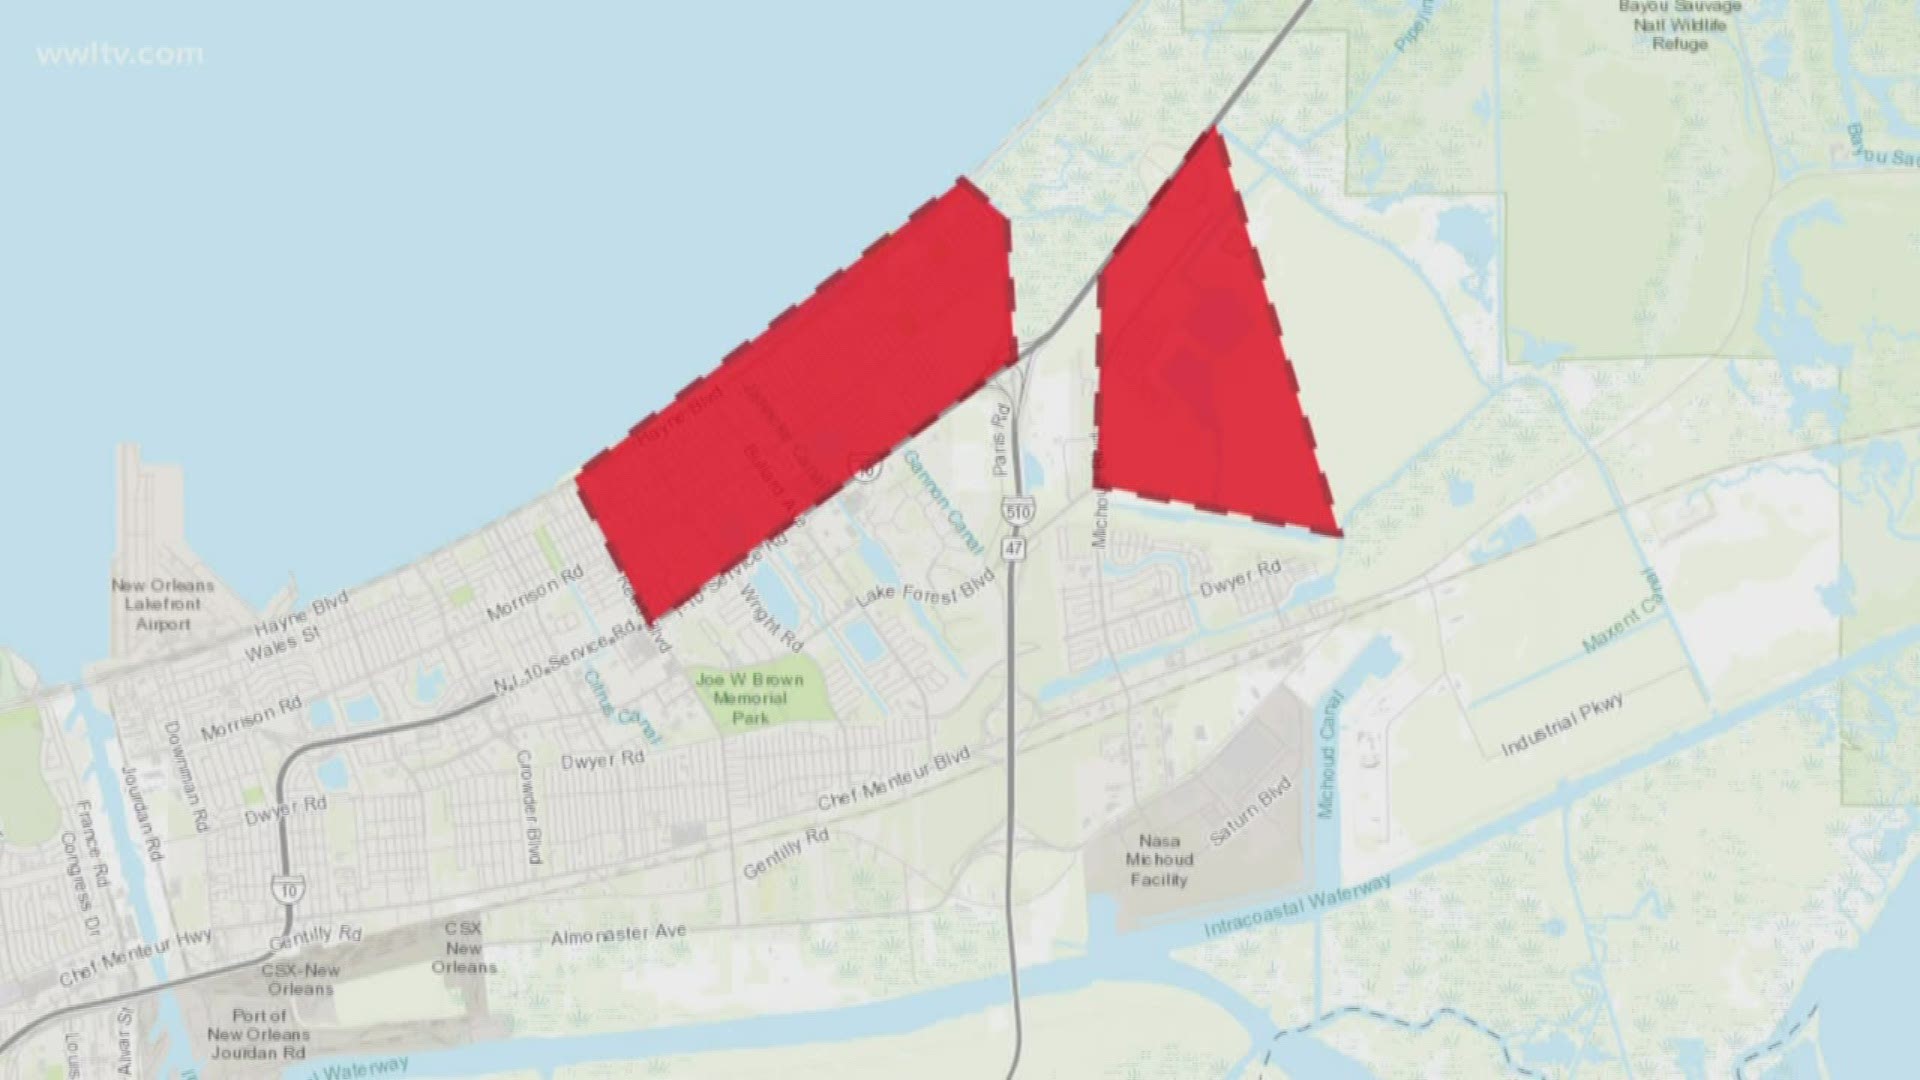 A precautionary boil water advisory for parts of New Orleans East was canceled Friday morning by the Sewerage & Water Board of New Orleans.